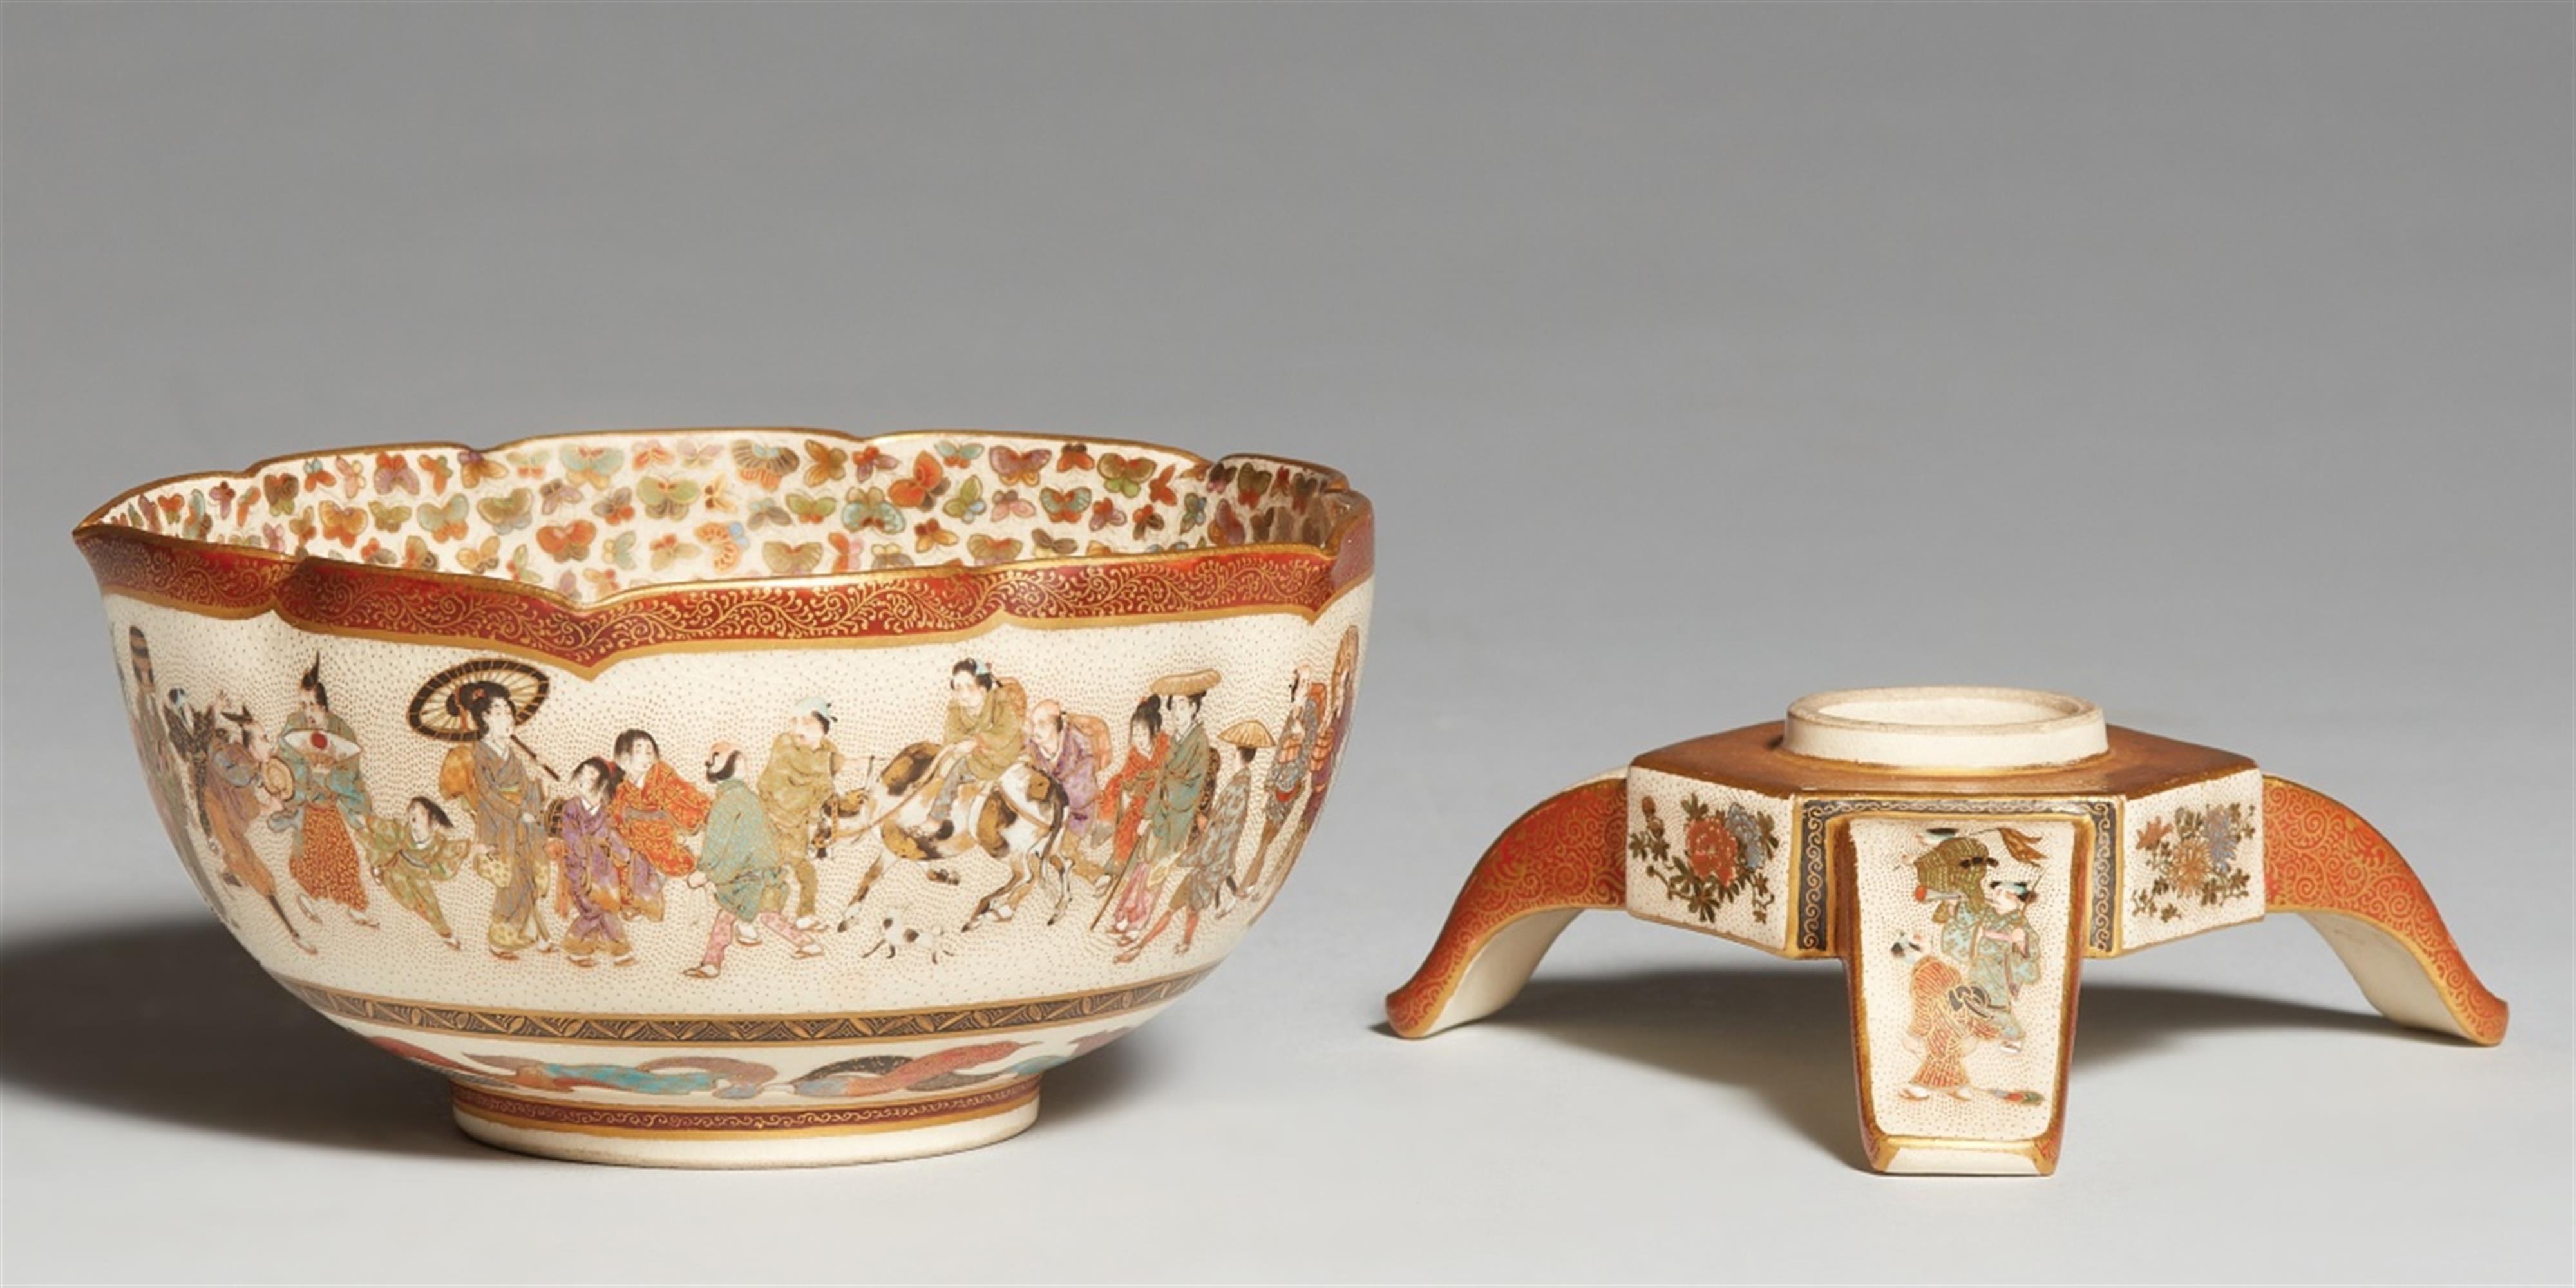 A very fine Satsuma bowl and a separate stand. Around 1900 - image-1